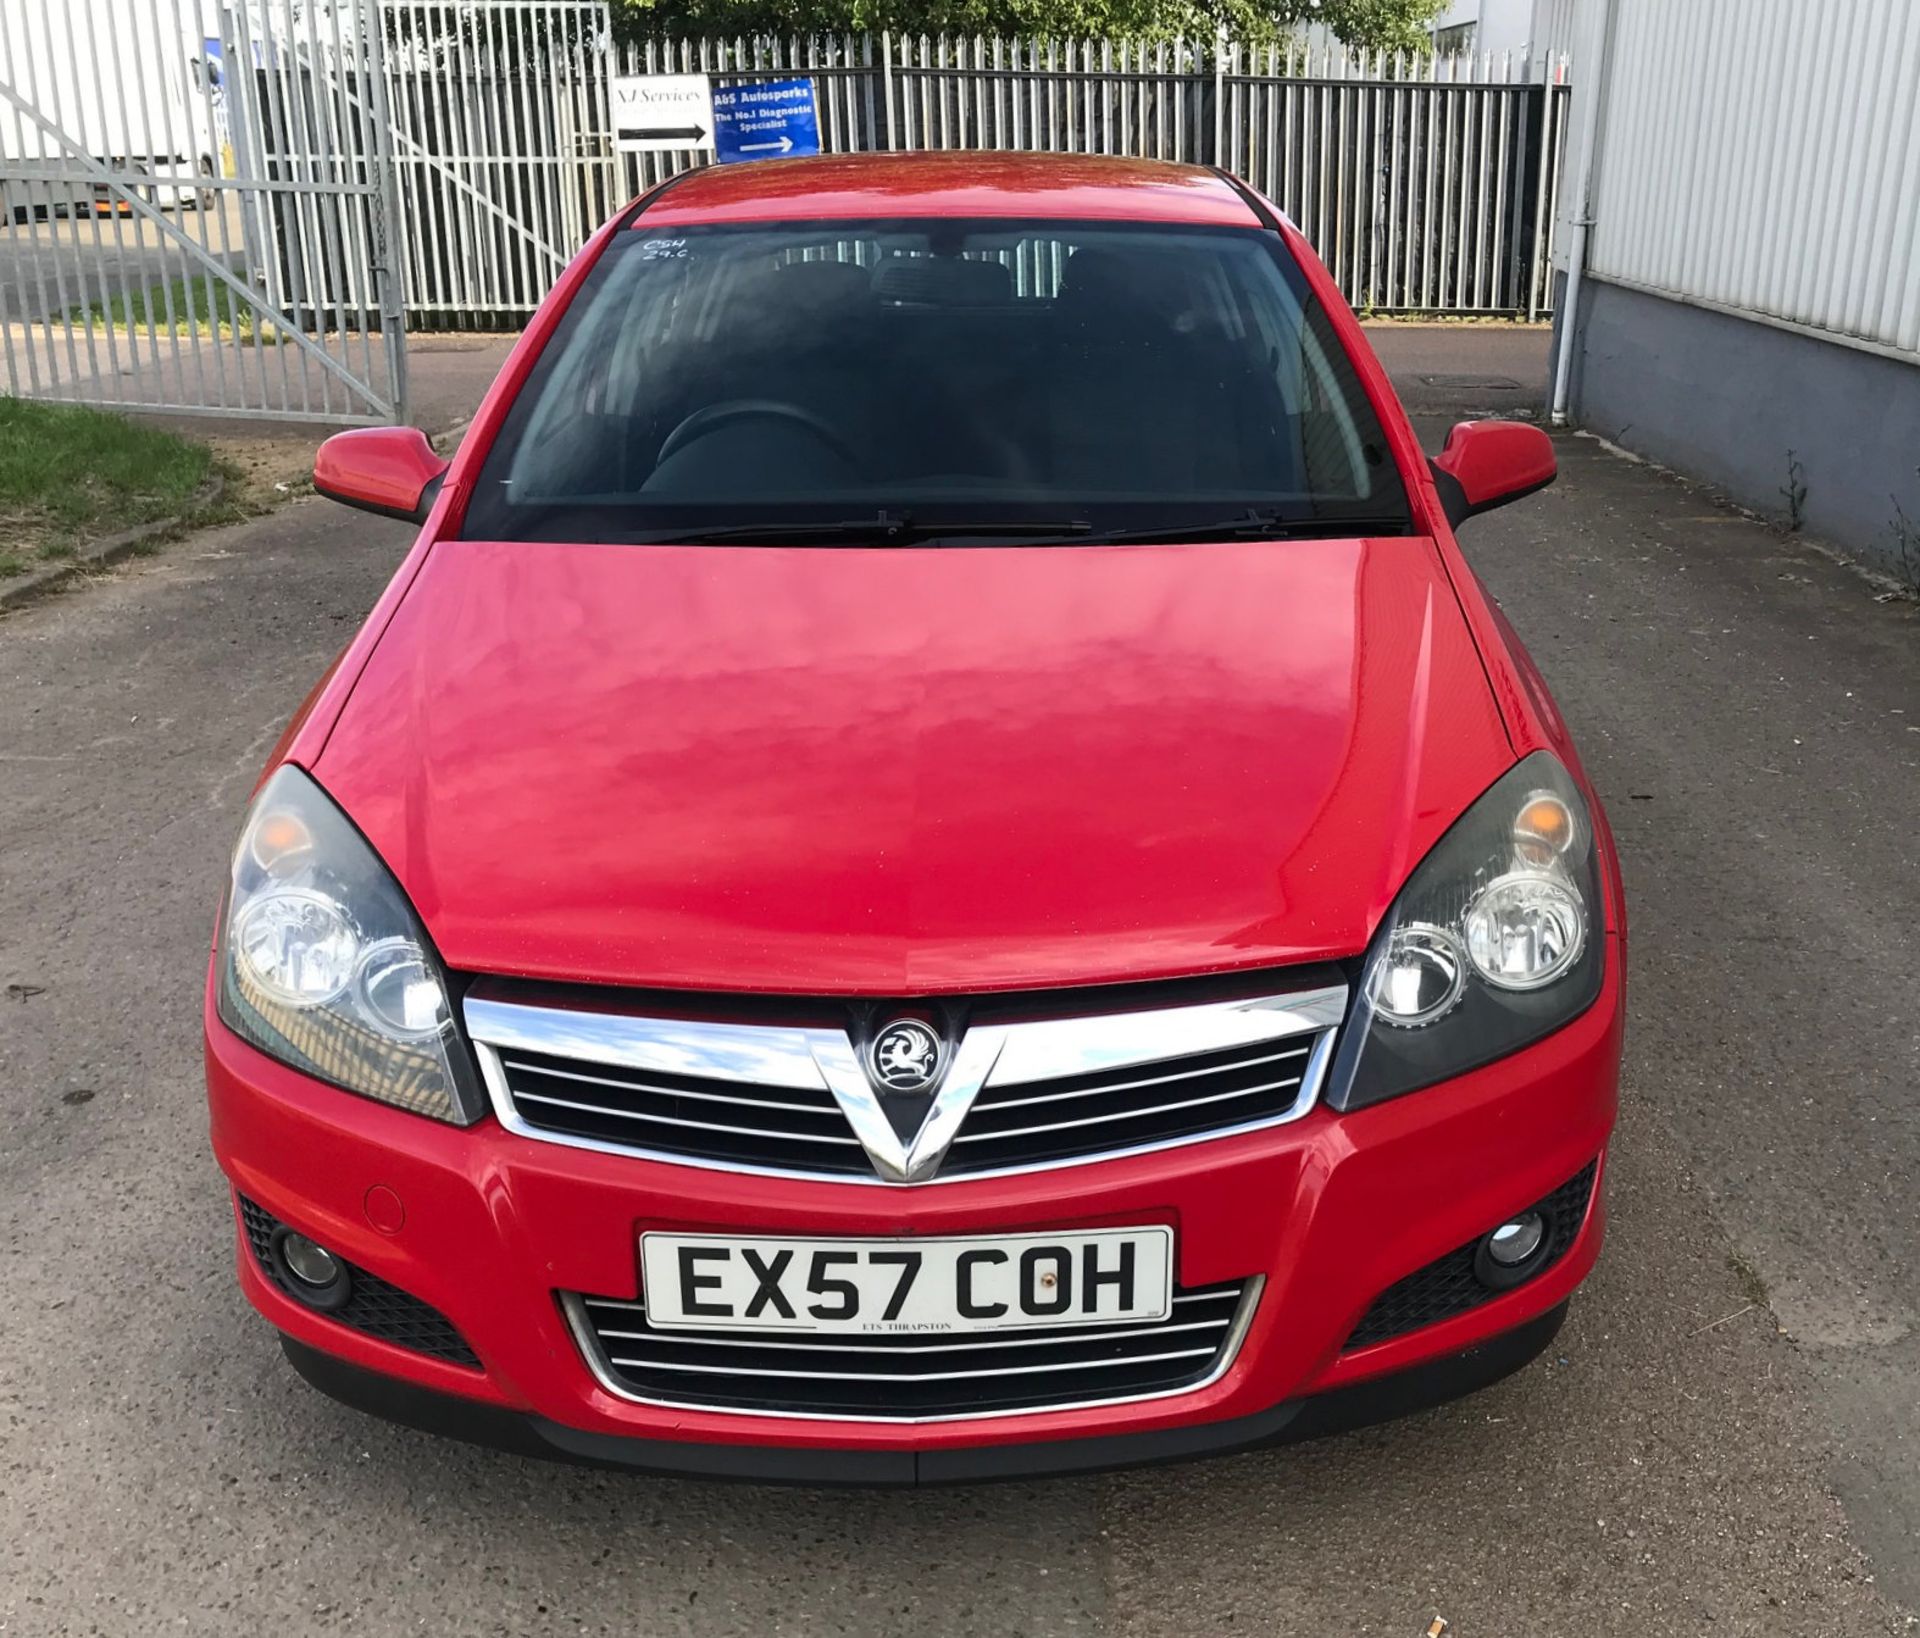 2007 Vauxhall Astra SXI 1.7 CDTI 5Dr Hatchback - CL505 - NO VAT ON THE HAMMER - Location: - Image 2 of 15